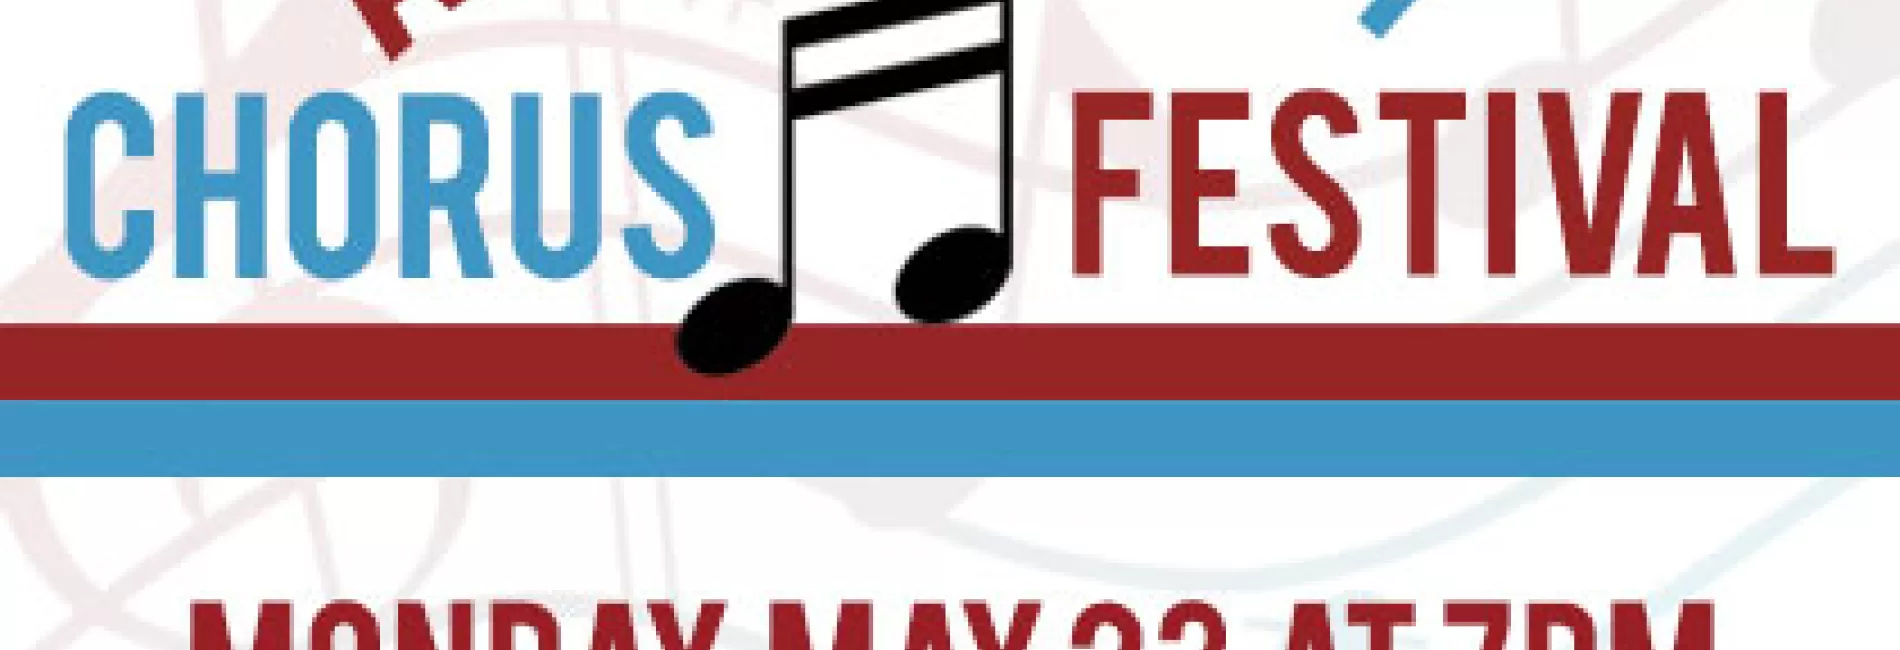 All-District CHORUS Festival - May 23 Mon - Westlake Cluster